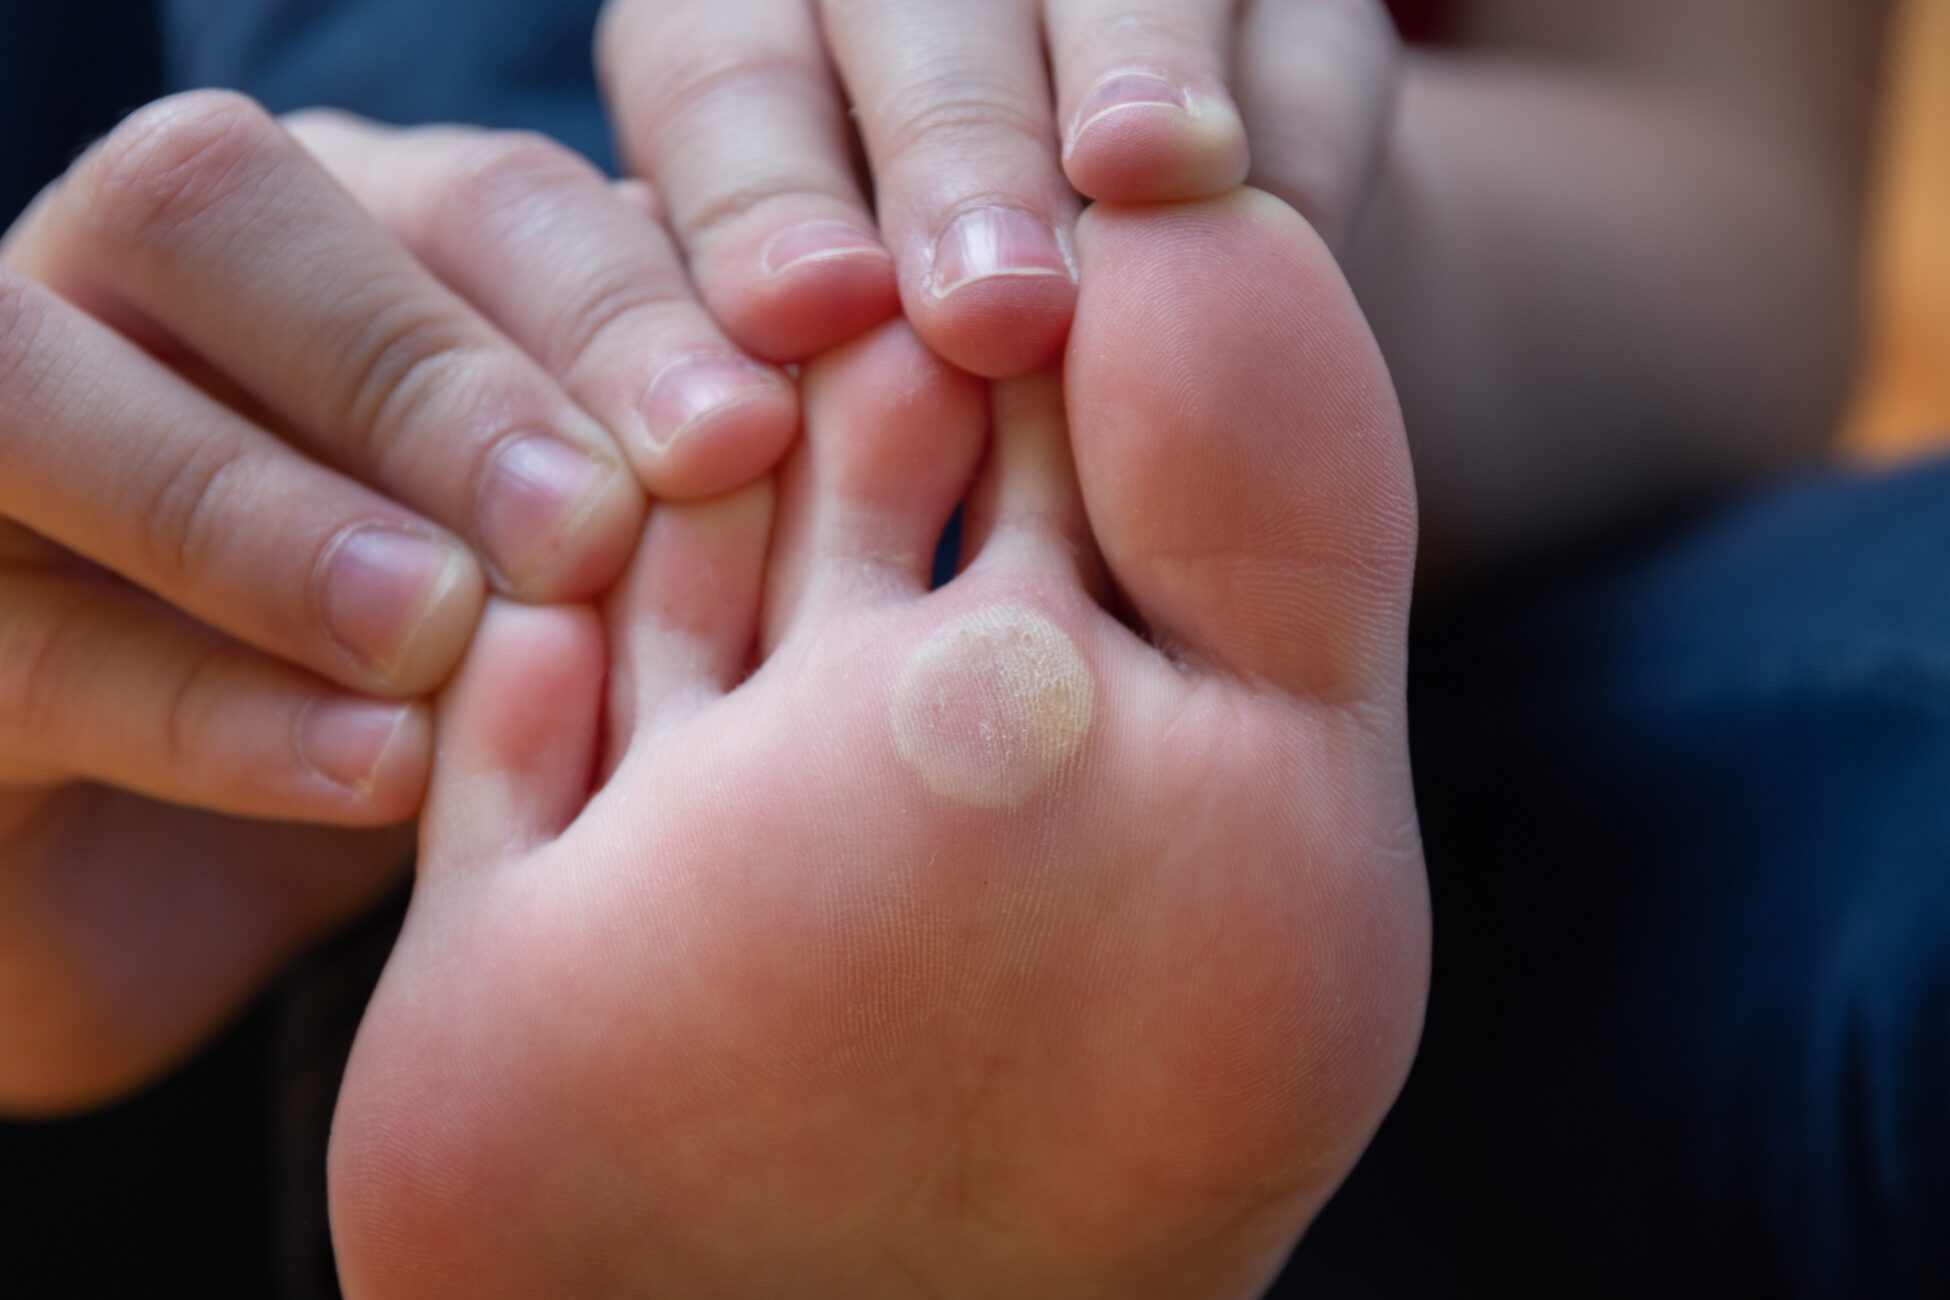 https://feetfirstclinic.com/wp-content/uploads/What-are-corns-and-calluses-treatment-and-prevention-2-scaled-1.jpg